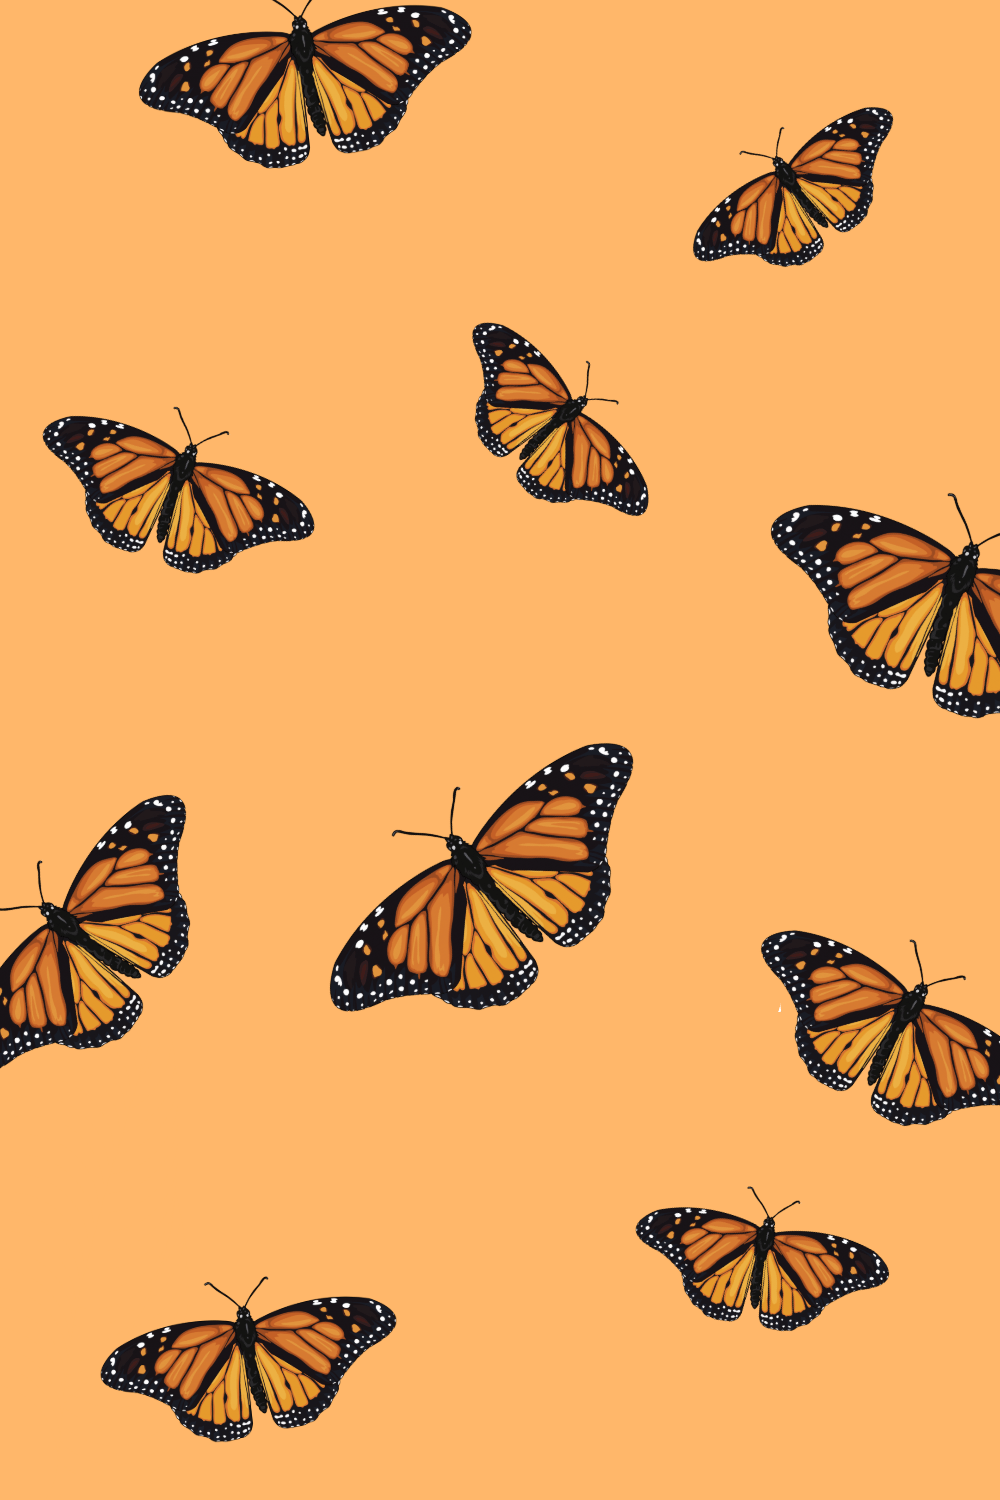 Art design yellow butterfly 640x1136 iPhone 55S5CSE wallpaper  background picture image